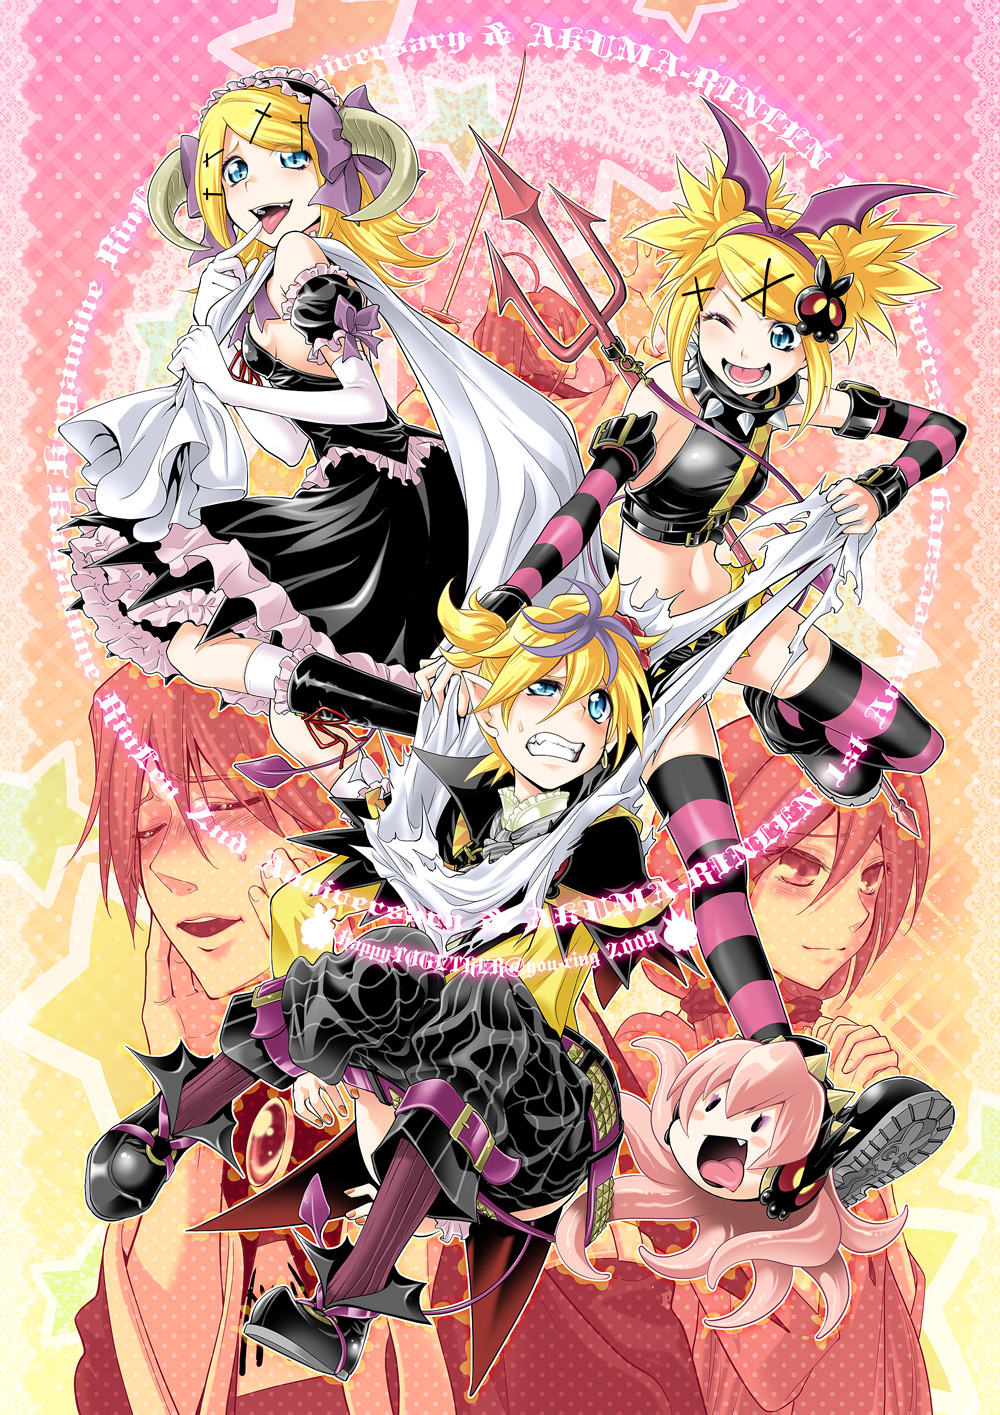 3girls bat_wings blonde_hair blue_eyes boots bow fang finger_to_mouth hair_bow hatsune_miku head_wings highres horns kagamine_len kagamine_rin kaito kamui_gakupo kitano_tomotoshi megurine_luka multiple_boys multiple_girls one_eye_closed open_mouth pink_hair pointy_ears pretty_panties_akuma_rin_(vocaloid) striped striped_legwear takoluka thighhighs tongue vocaloid wings